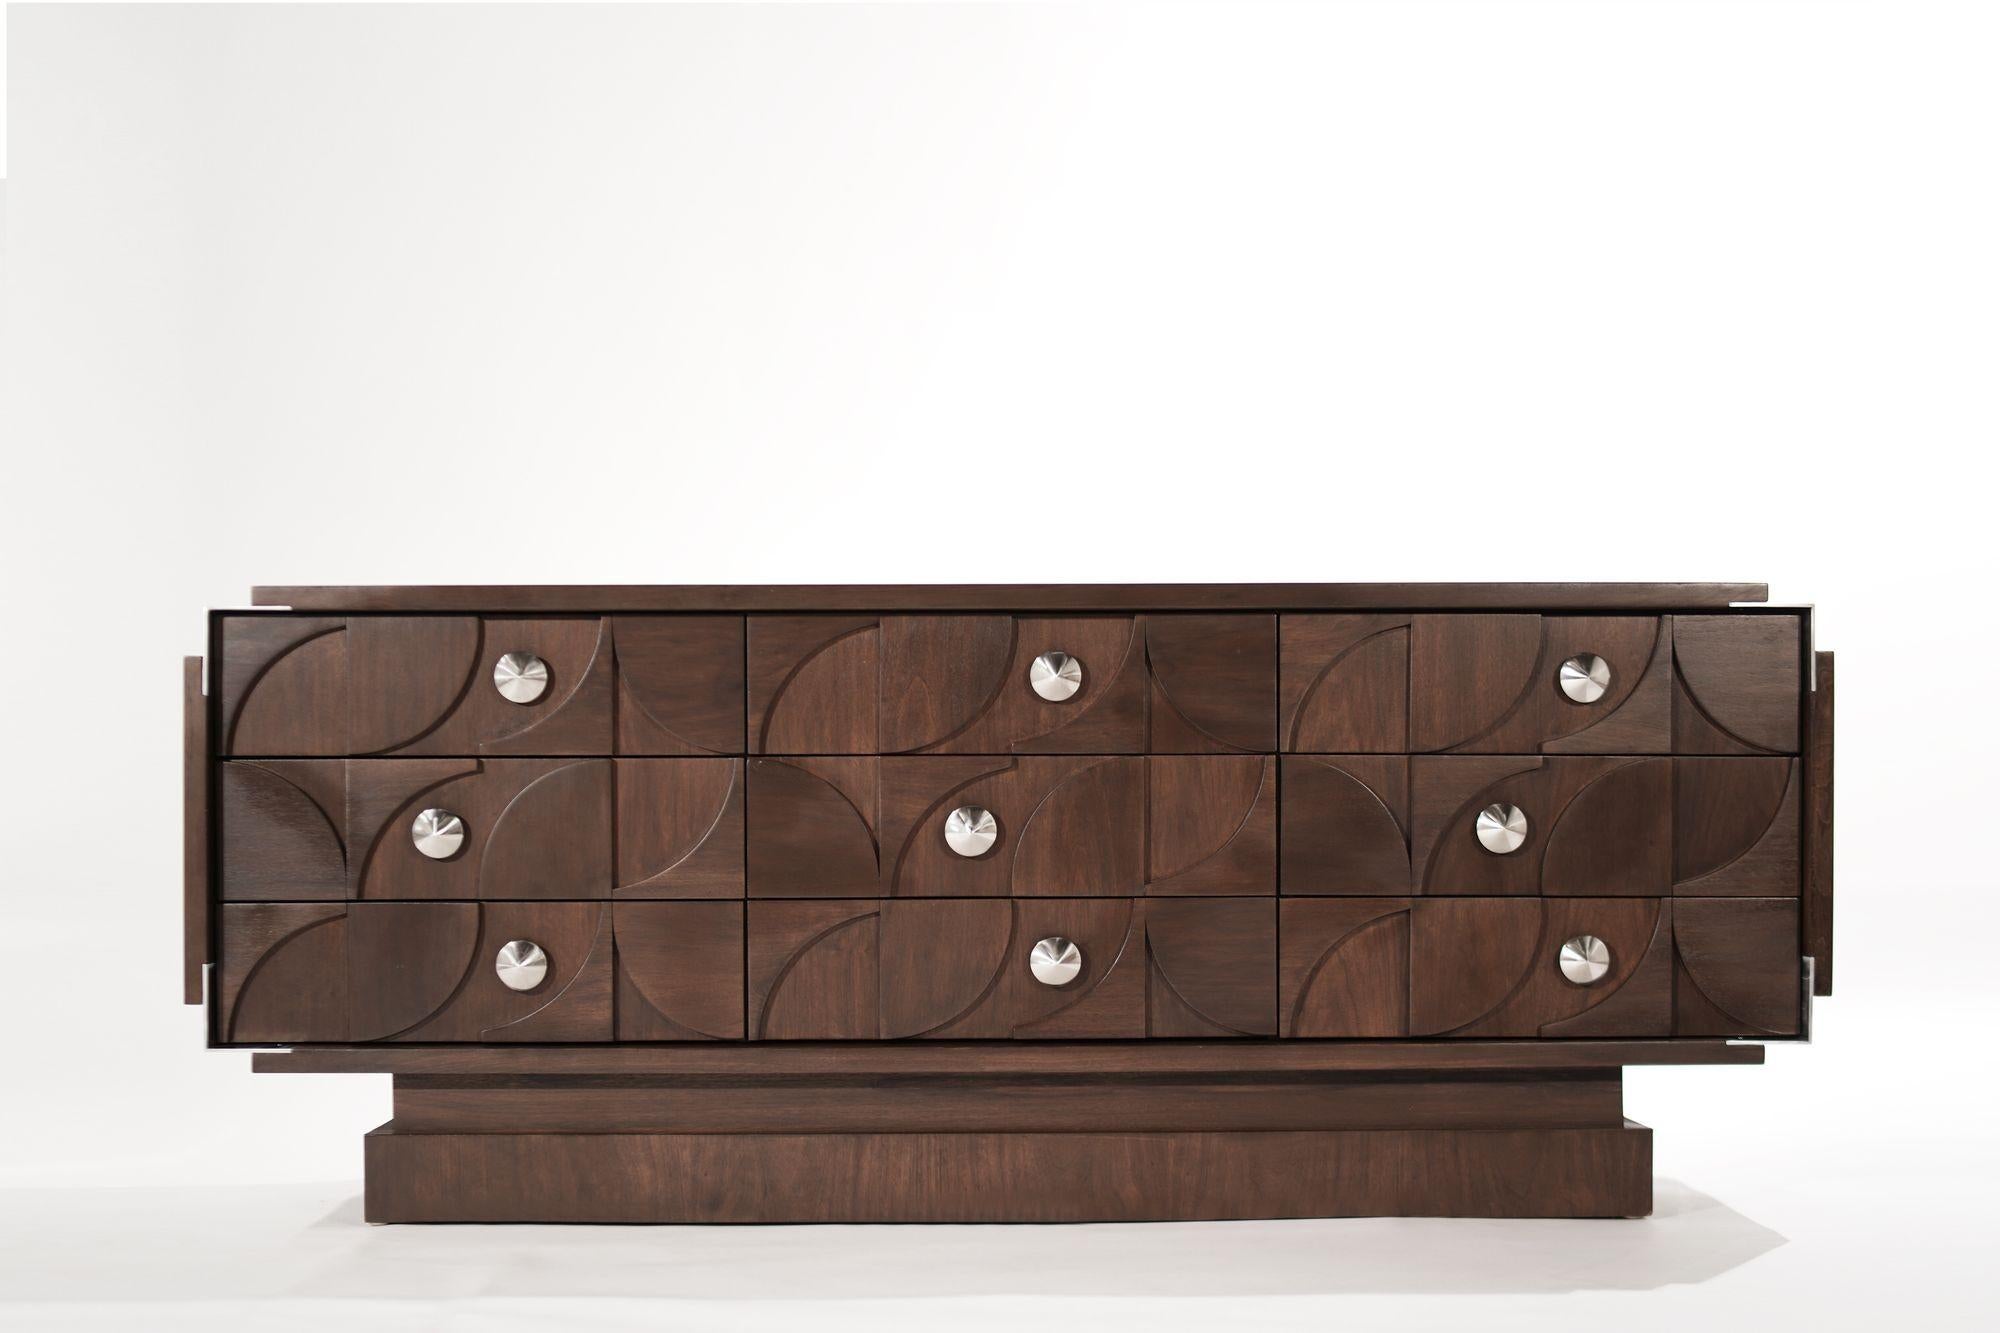 A brutalist-style dresser executed in walnut featuring nickel accent corners and hardware. The nine drawers provide ample storage space. Completely restored.
 
Other designers from this period include Paul Evans, Paul Frankl, Vladimir Kagan, and